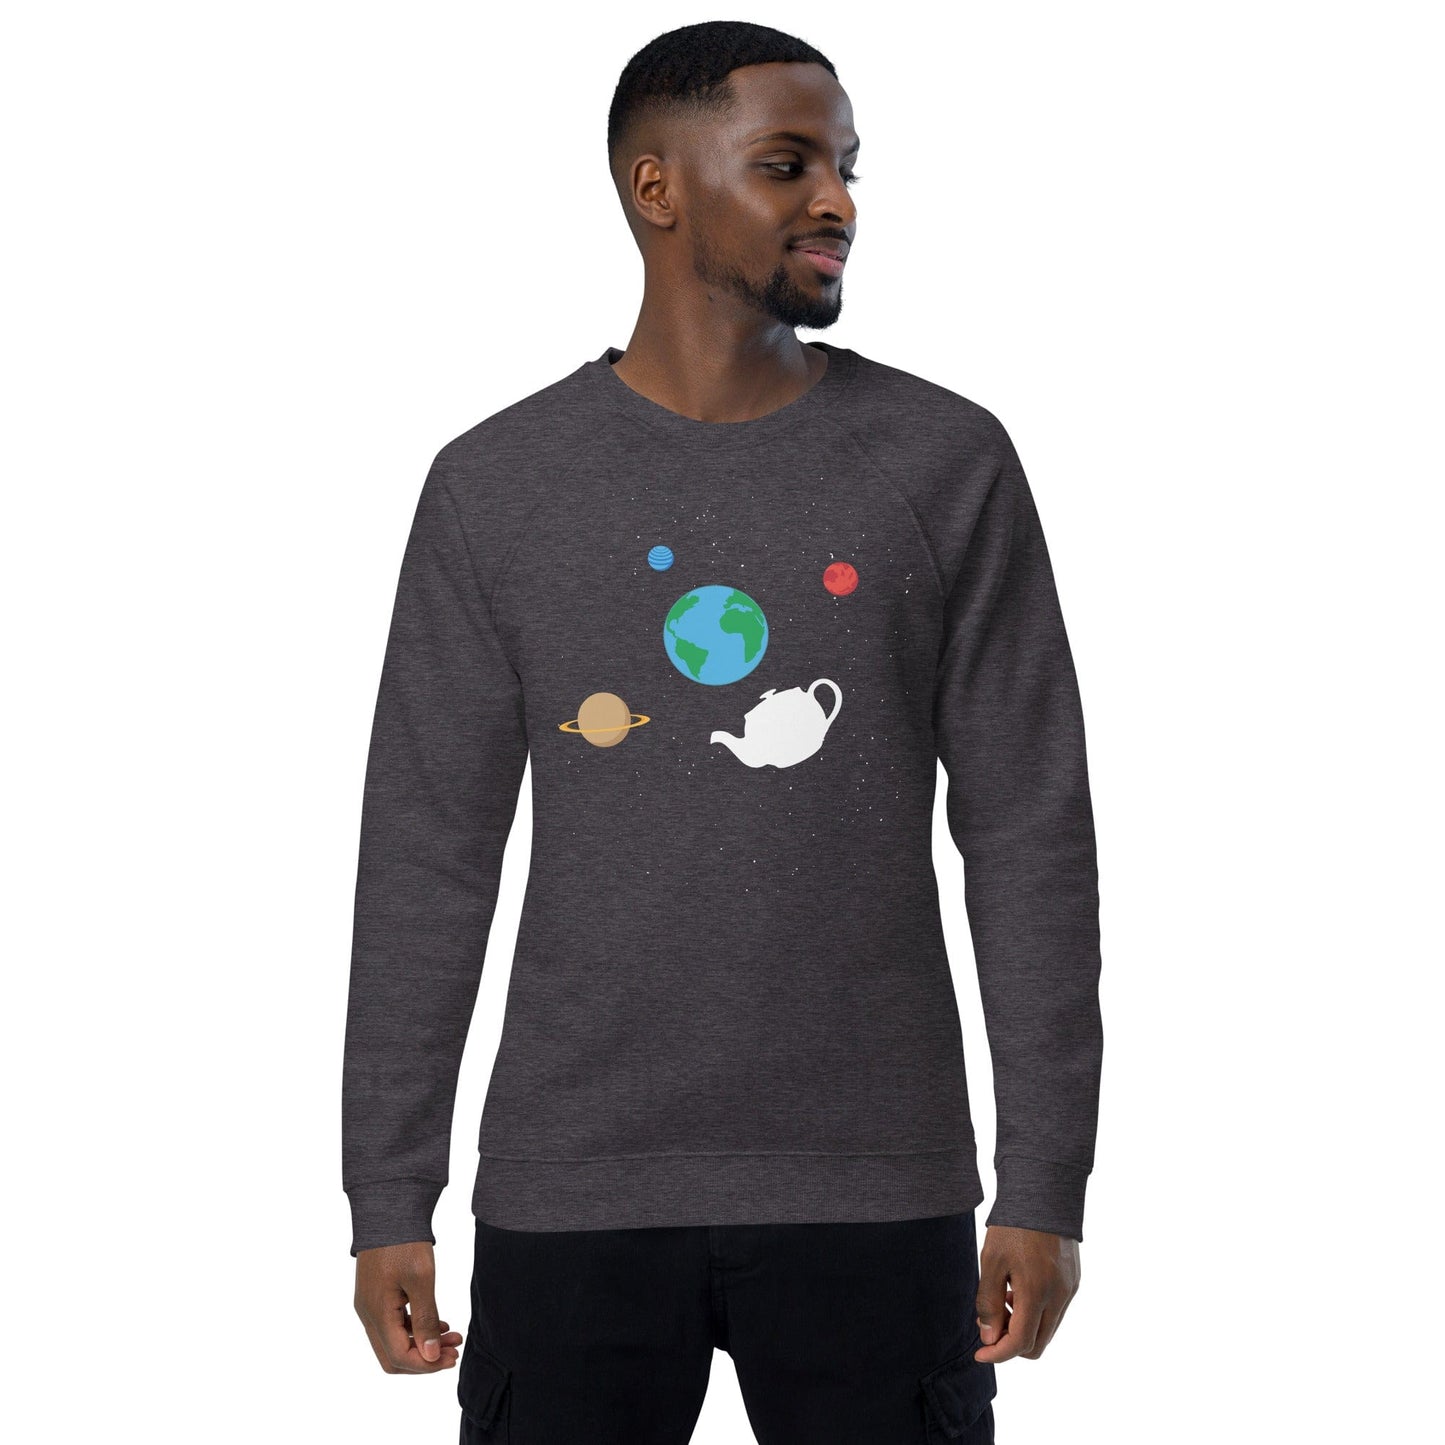 Russell's Teapot Floating in Space - Eco Sweatshirt